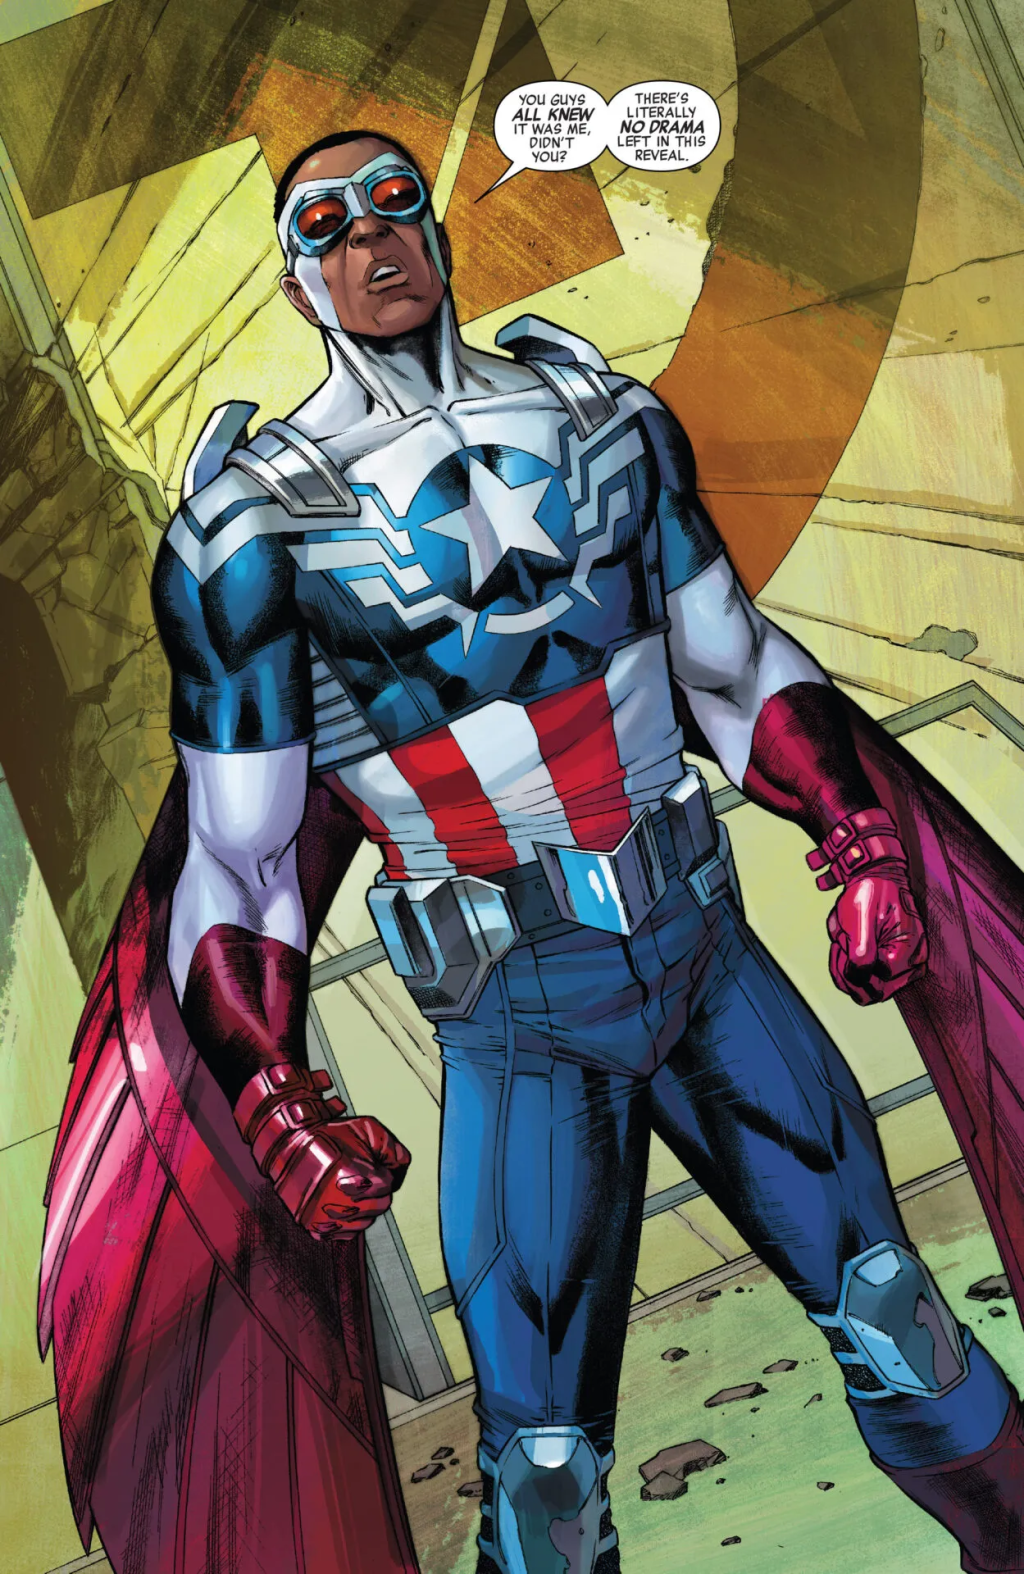 Sam Wilson steps into the role of the Star-Spangled Avengers in Captain America Vol. 7 #25 “The Tomorrow Soldier: Conclusion” (2014), Marvel Comics. Words by Rick Remender, art by Carlos Pacheco, Stuart Immonen, Mariano Taibo, Wade Von Grawbadger, Dean White, Veronica Gandini, and Marte Gracia.